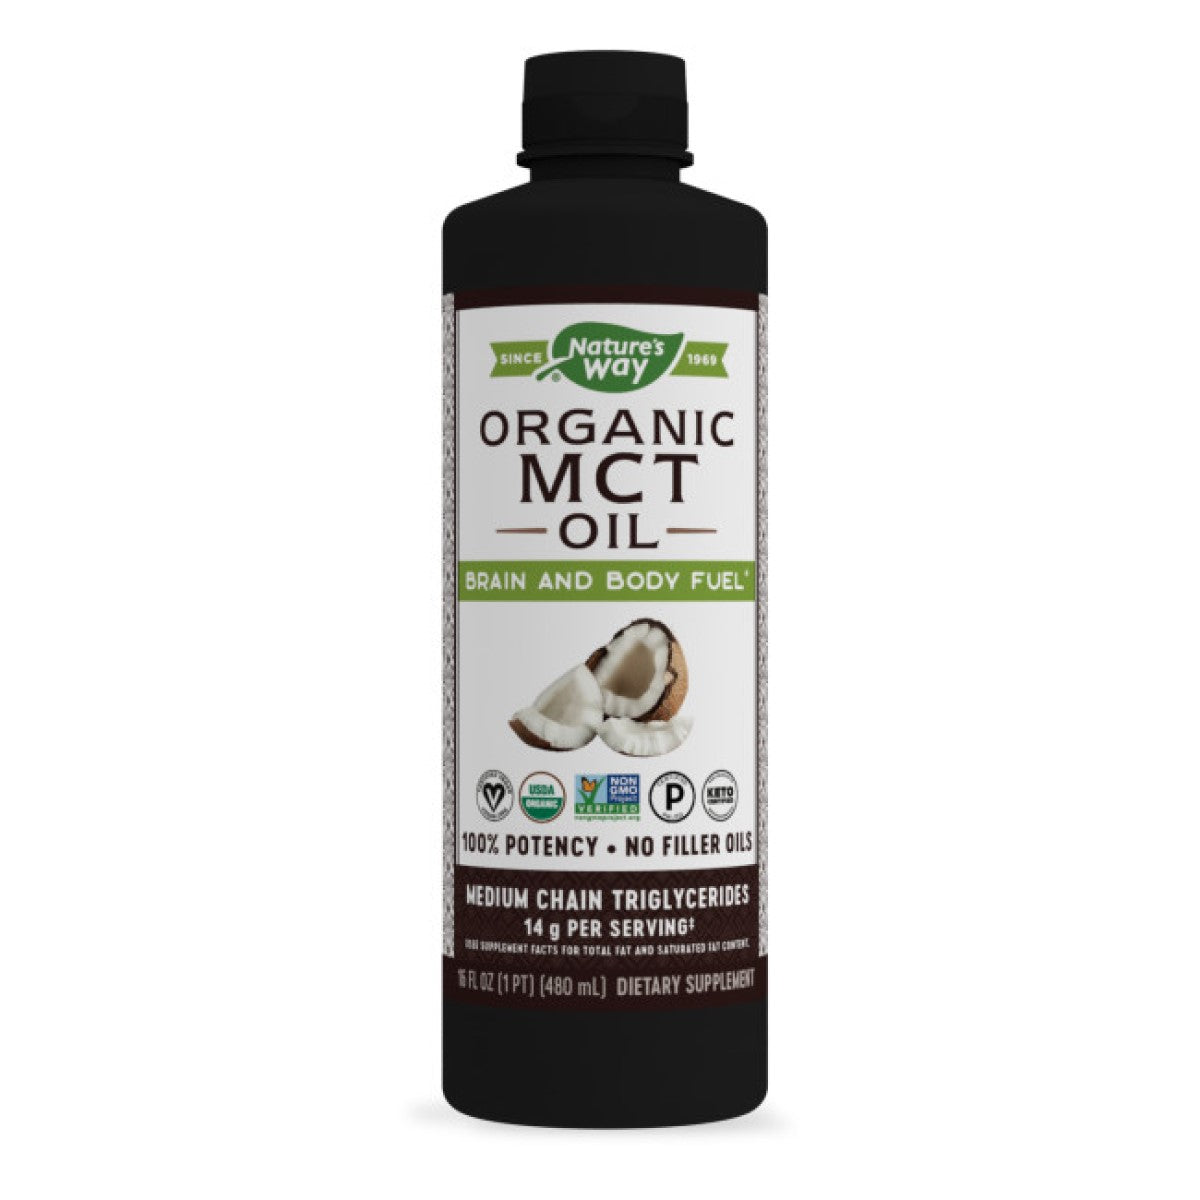 Primary image of 100% MCT Oil